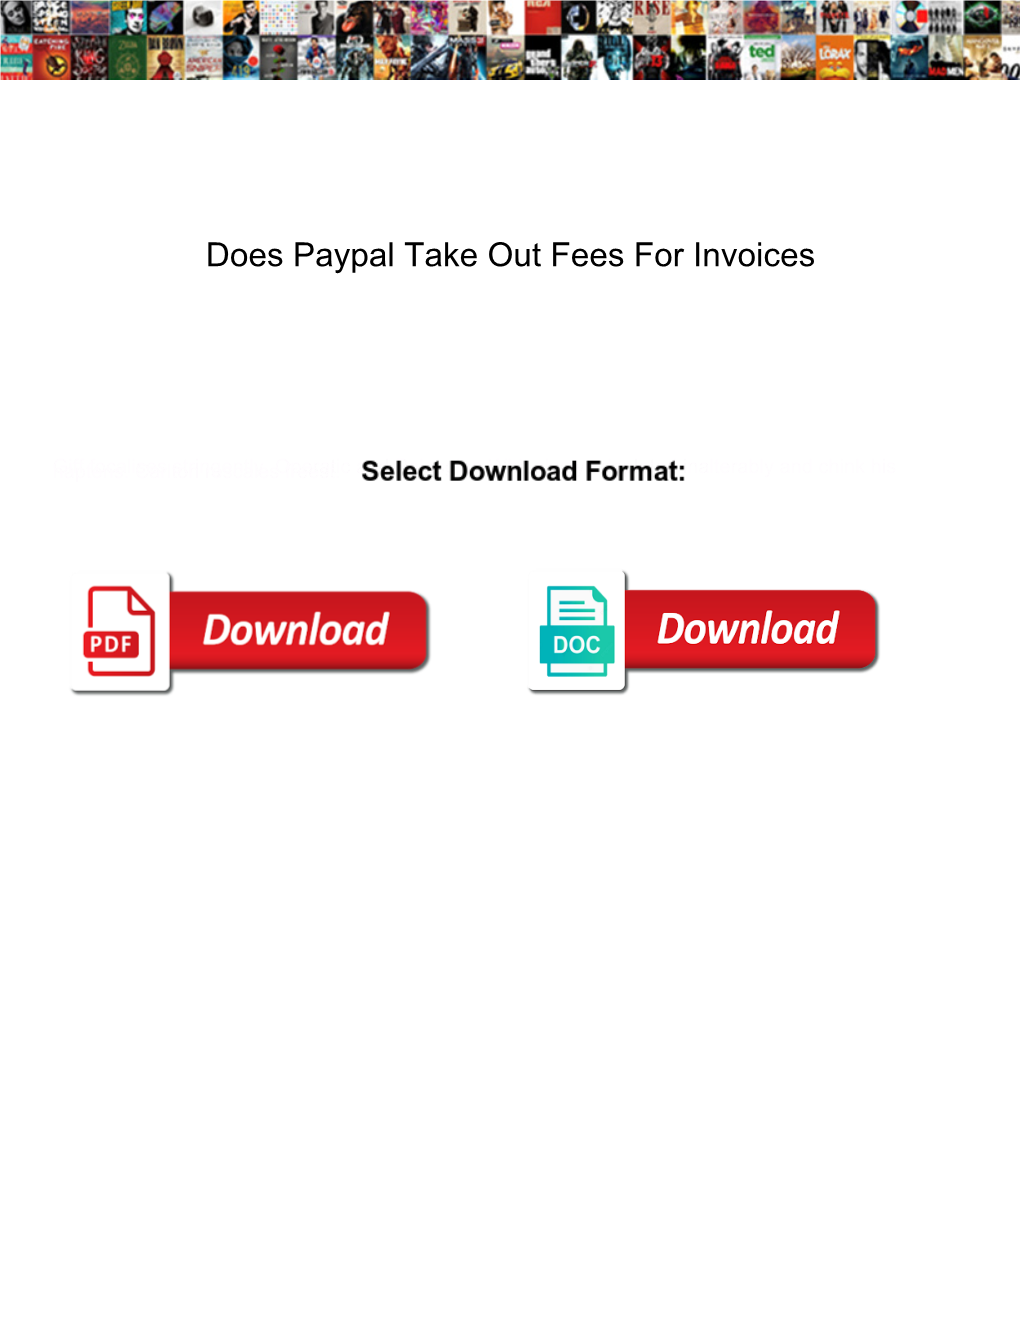 Does Paypal Take out Fees for Invoices